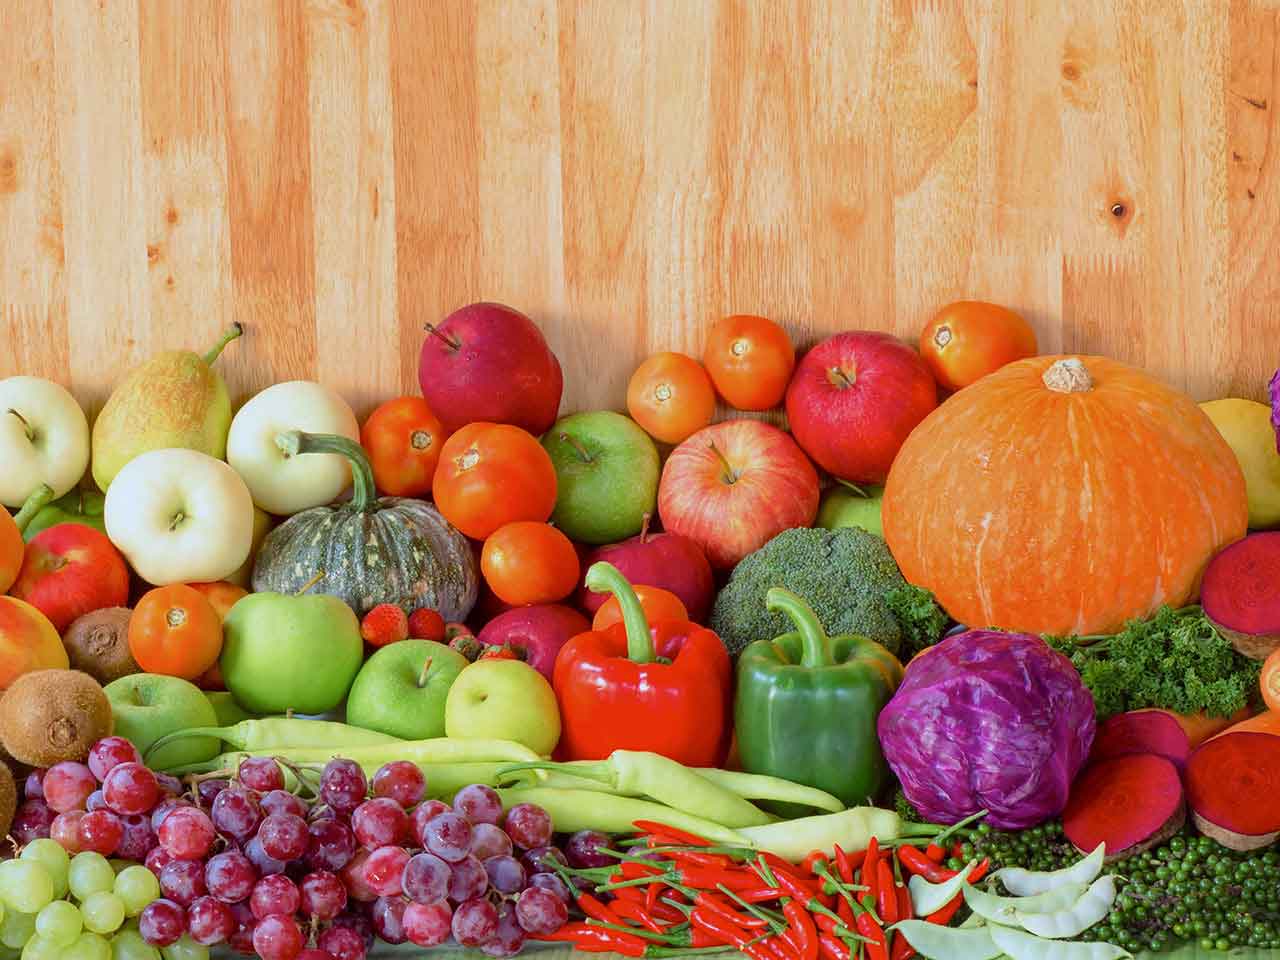 Colourful display of healthy fruit and vegetables